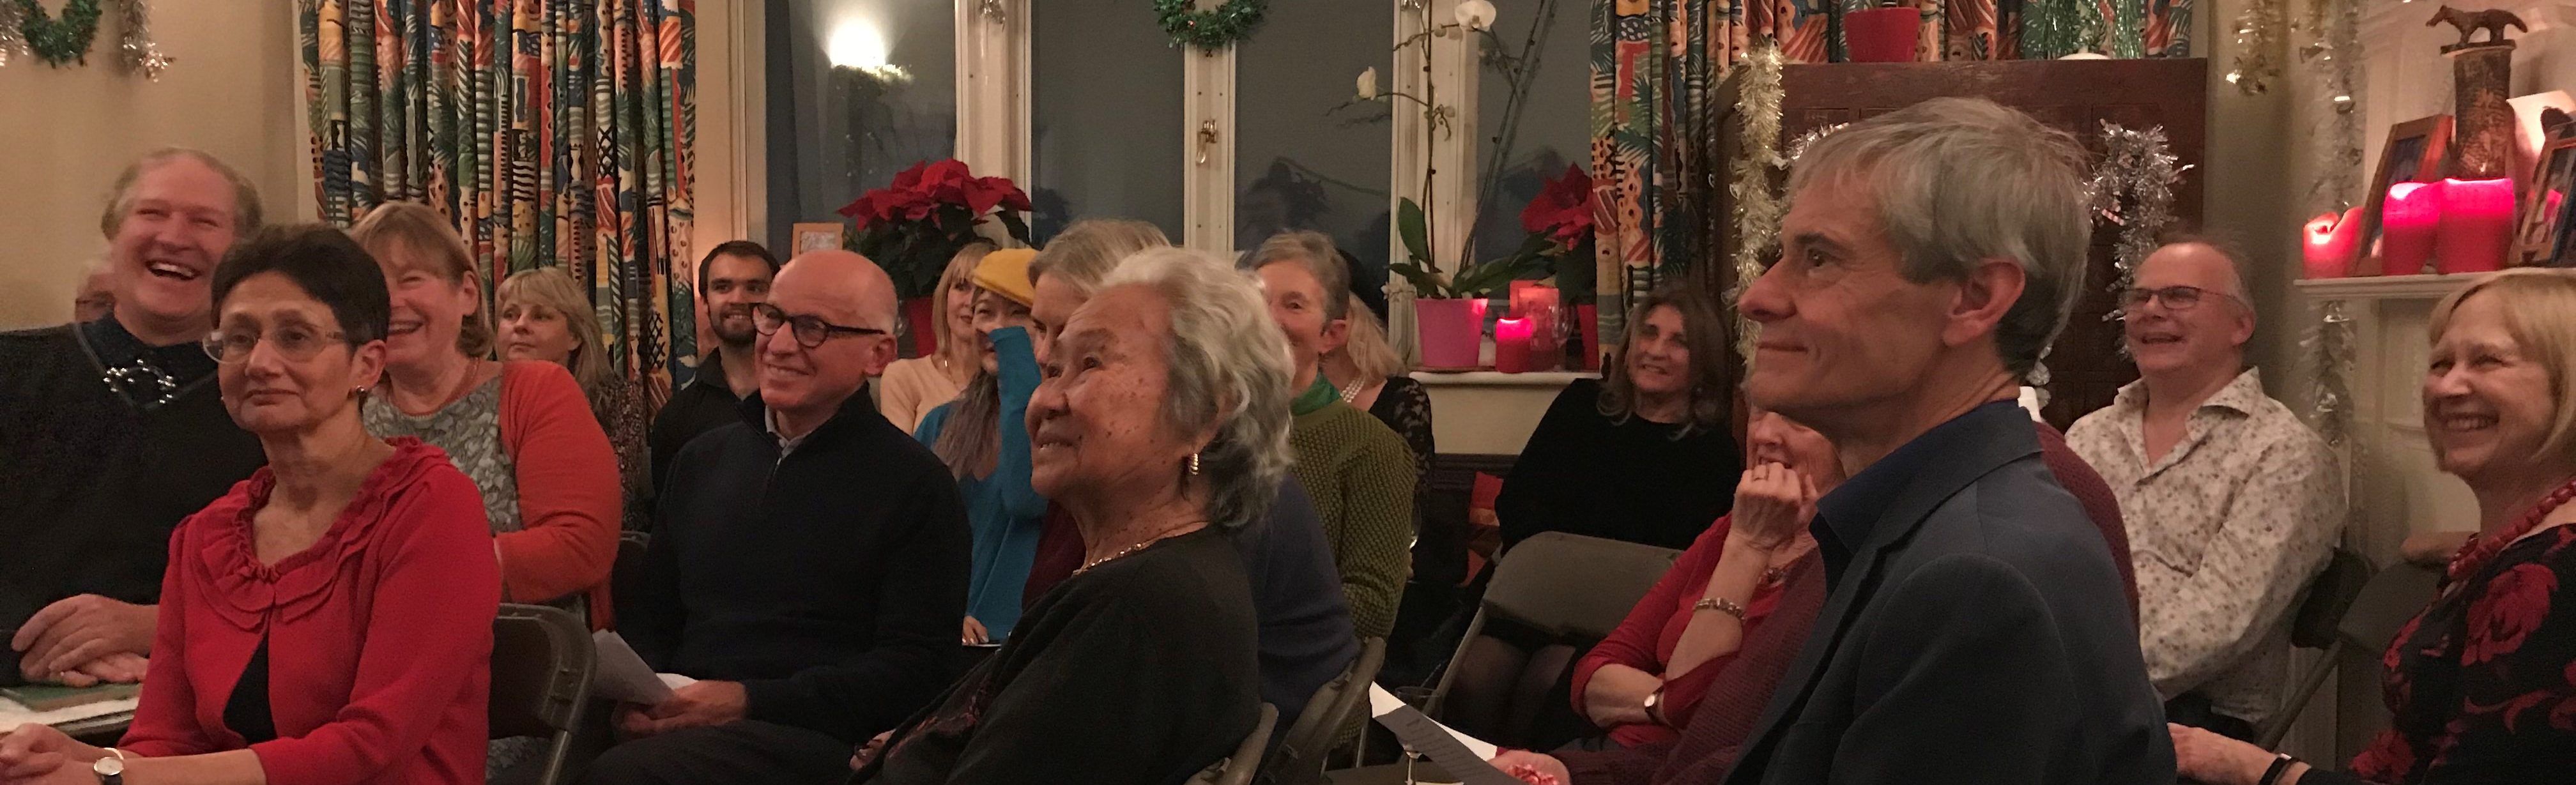 Festive fundraising at the 2017 Christmas party